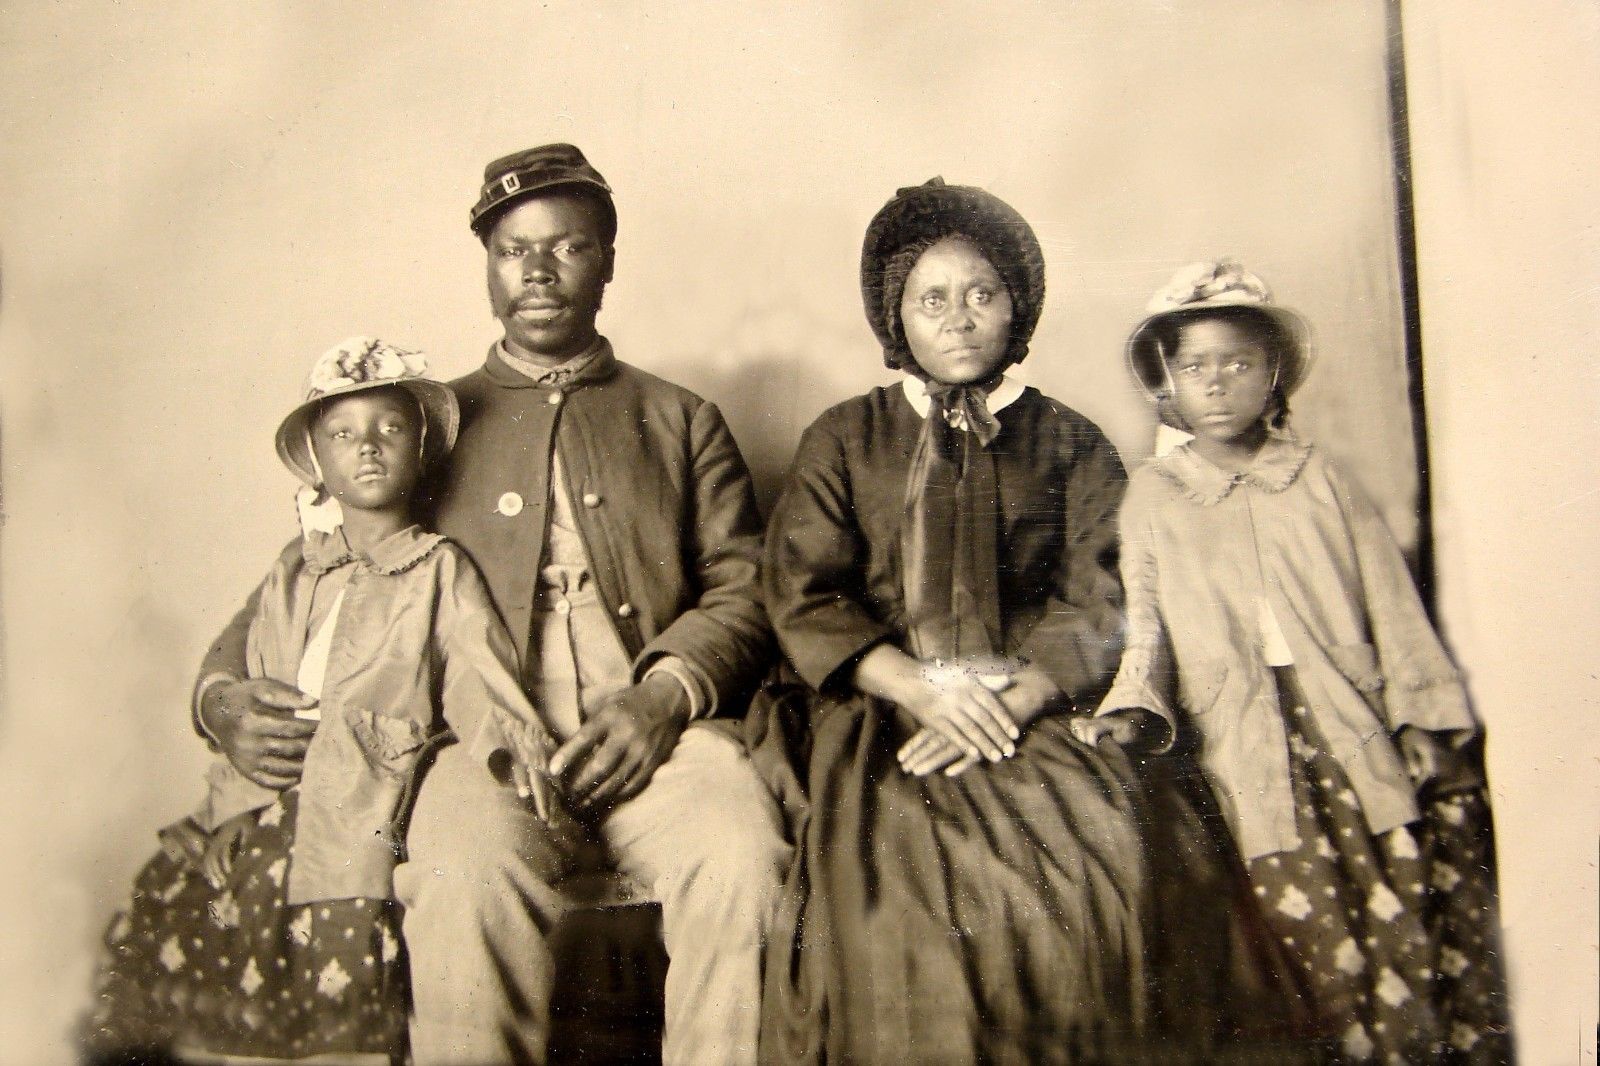 American Civil War Soldier with his wife and daughters circa 1863